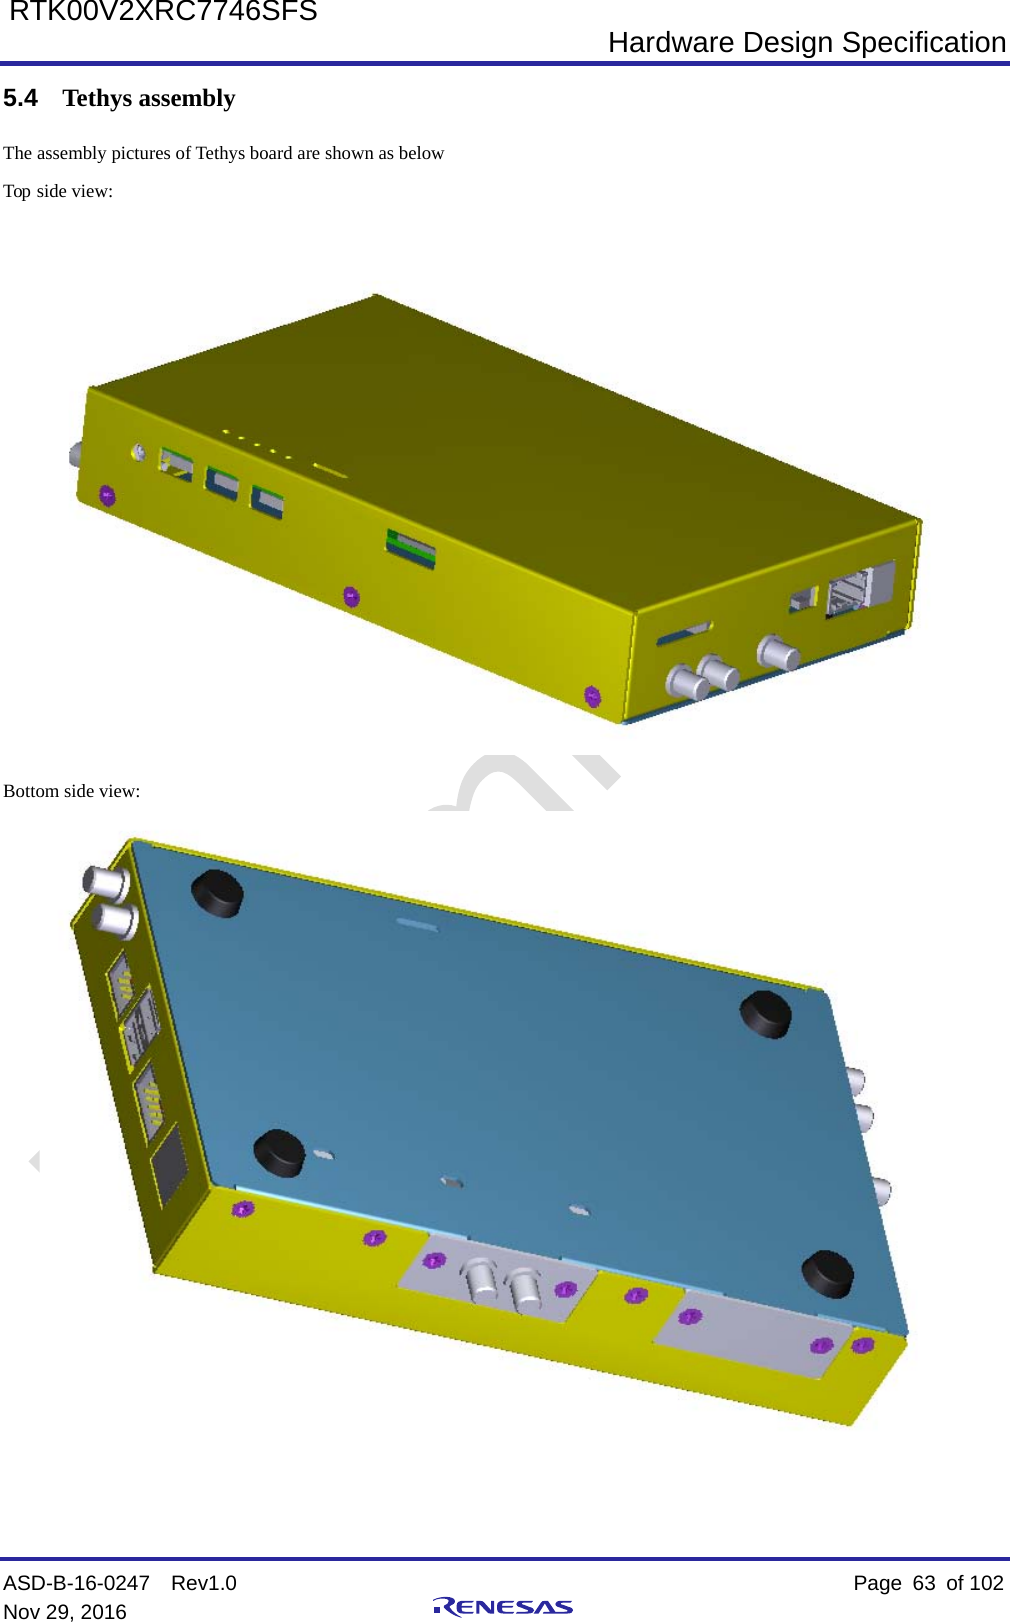  Hardware Design Specification ASD-B-16-0247  Rev1.0    Page  63 of 102 Nov 29, 2016     RTK00V2XRC7746SFS 5.4 Tethys assembly The assembly pictures of Tethys board are shown as below Top side view:   Bottom side view:    